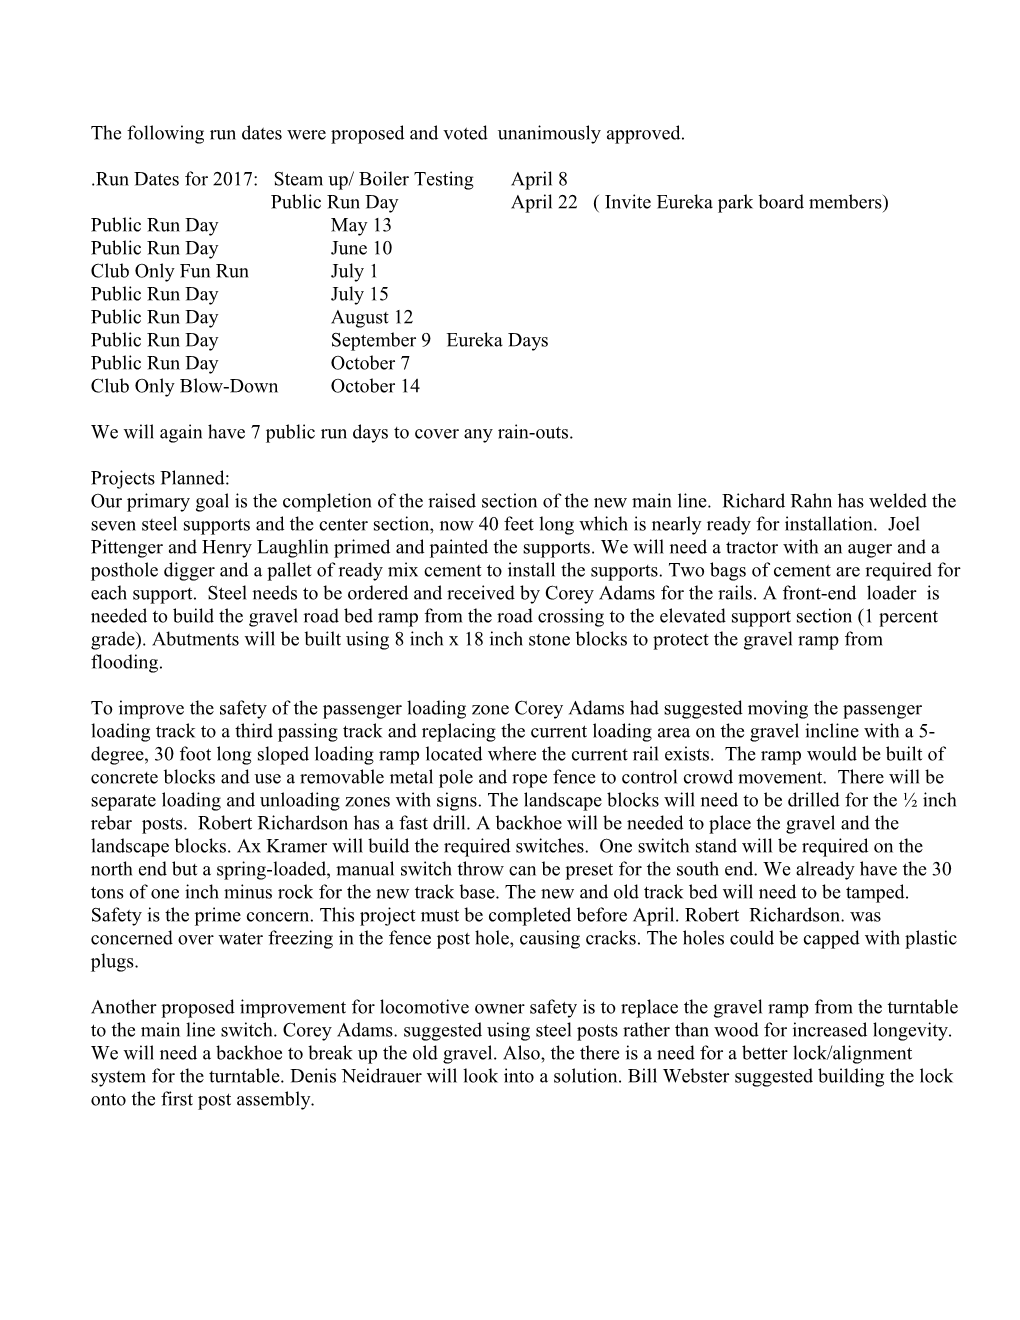 Minutes of the January 30, 2010 Meeting of the Saint Louis